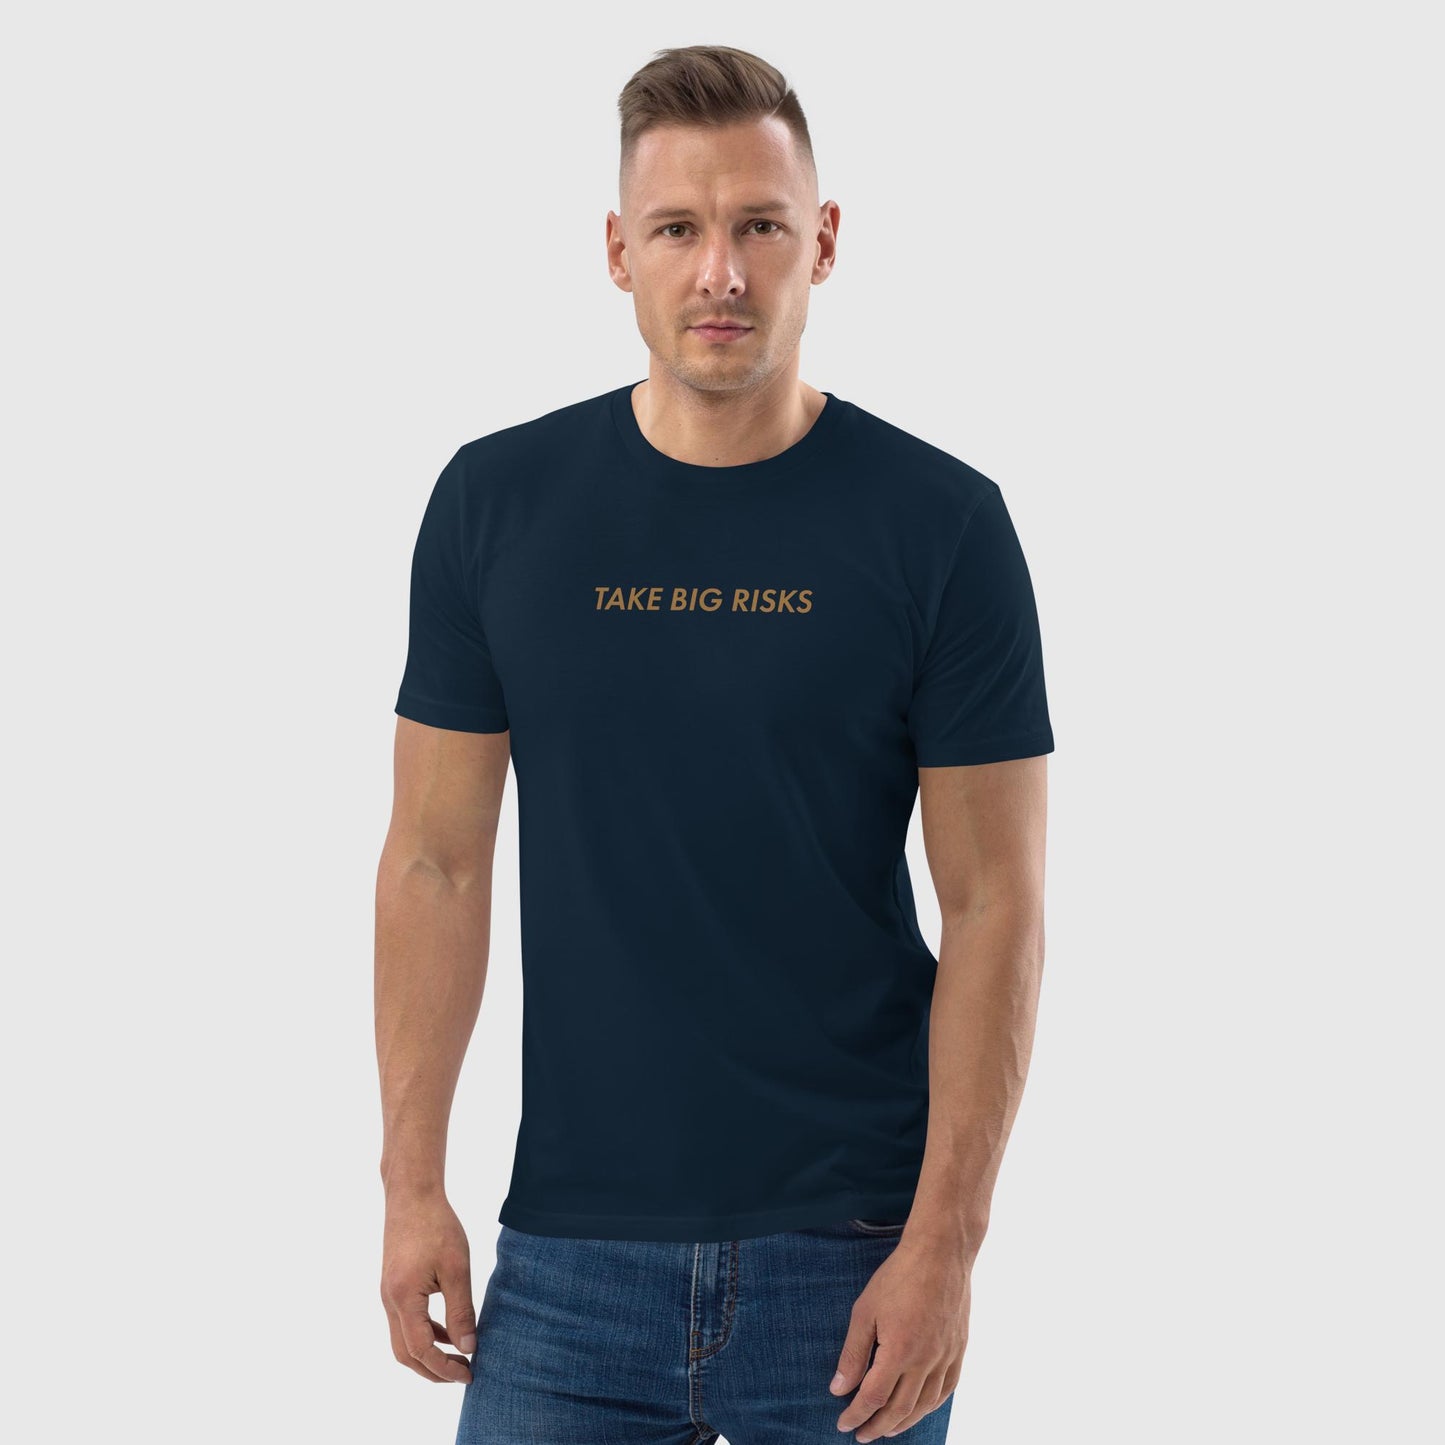 Men's french navy organic cotton t-shirt that features Bill Gates' quote on success, "Take Big Risks."